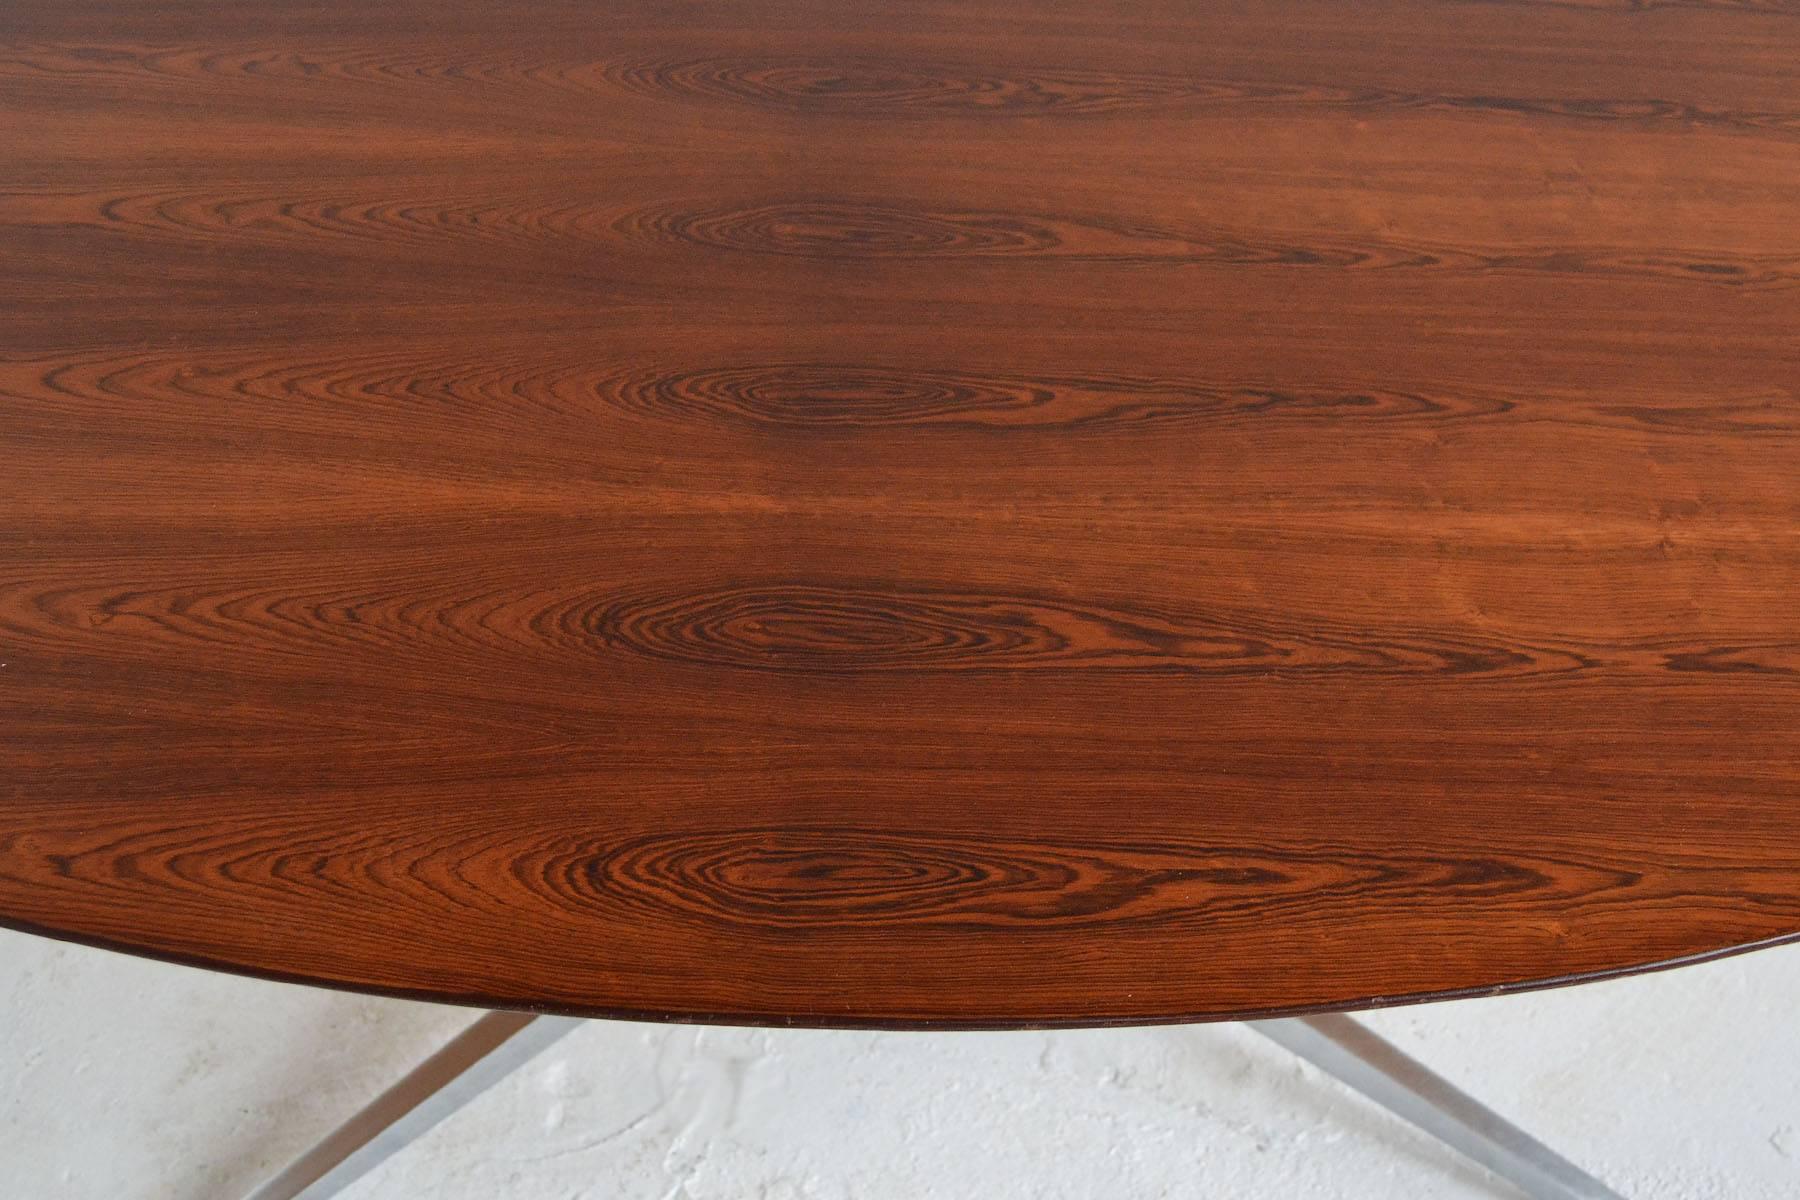 American Florence Knoll Rosewood Elliptical Dining or Conference Table